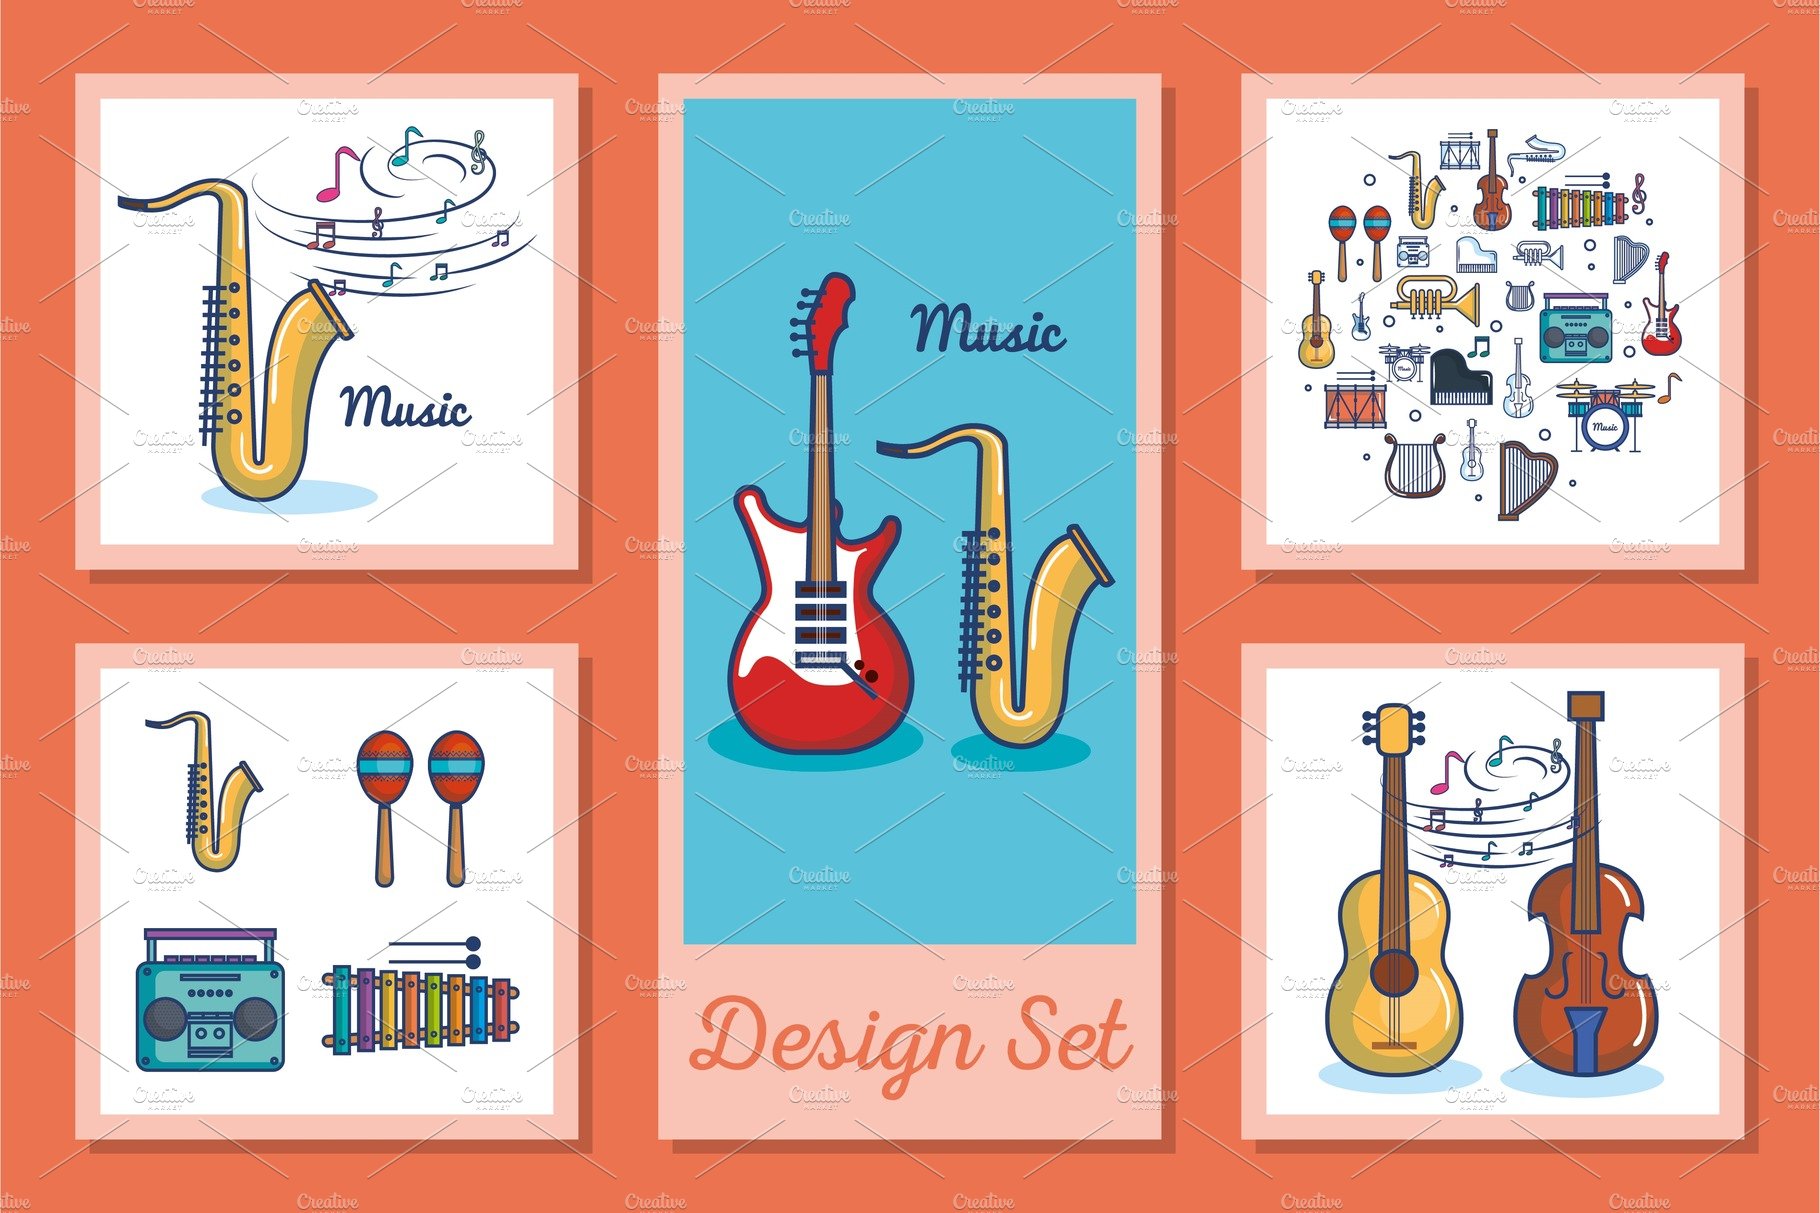 designs set of music instruments cover image.